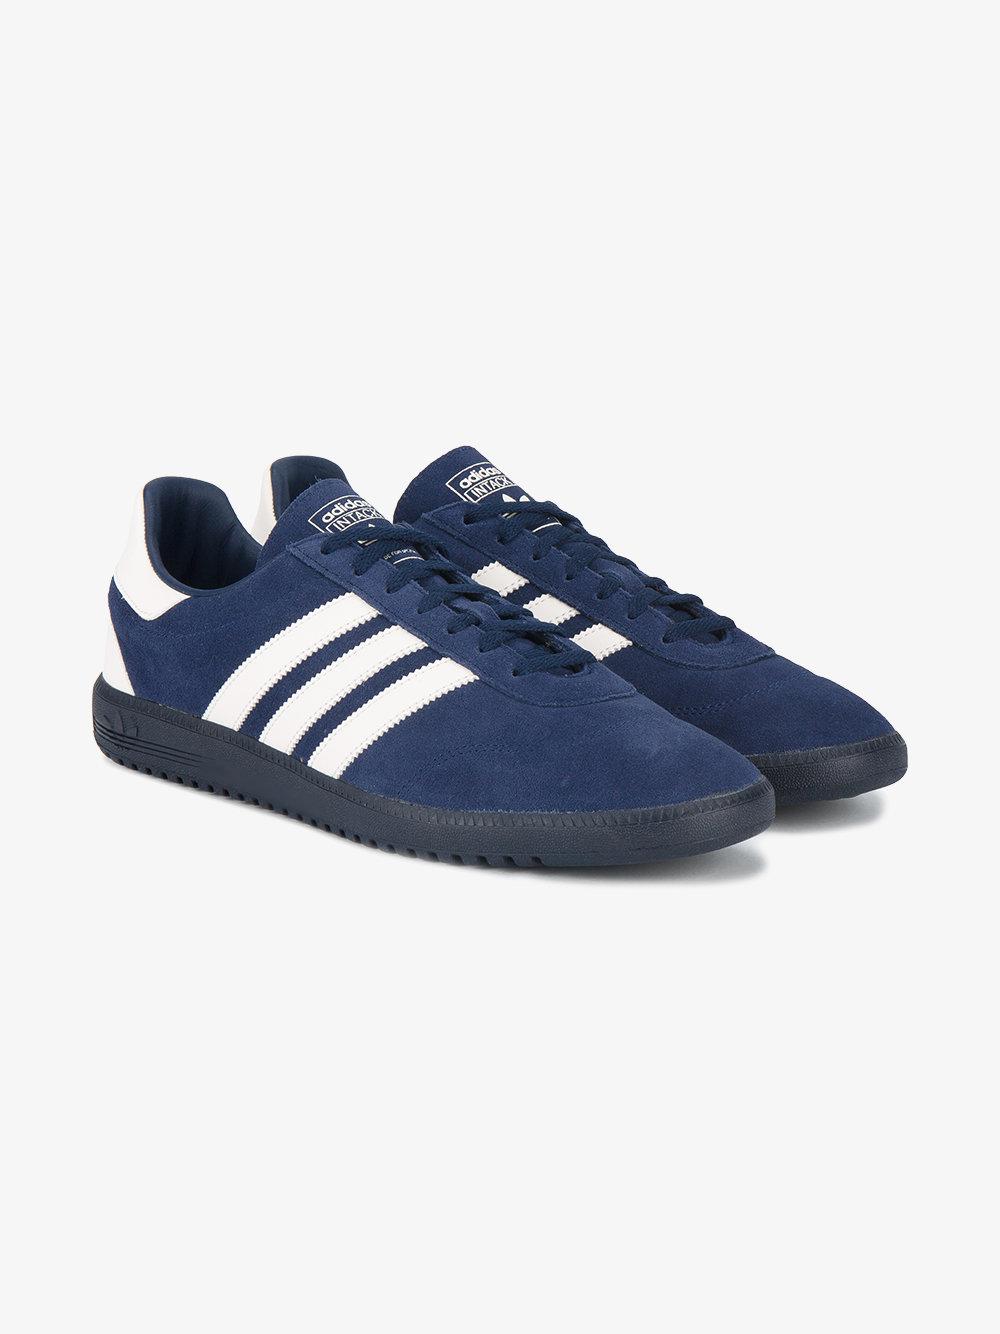 adidas Leather Spezial Intack Spzl in Blue for Men - Lyst